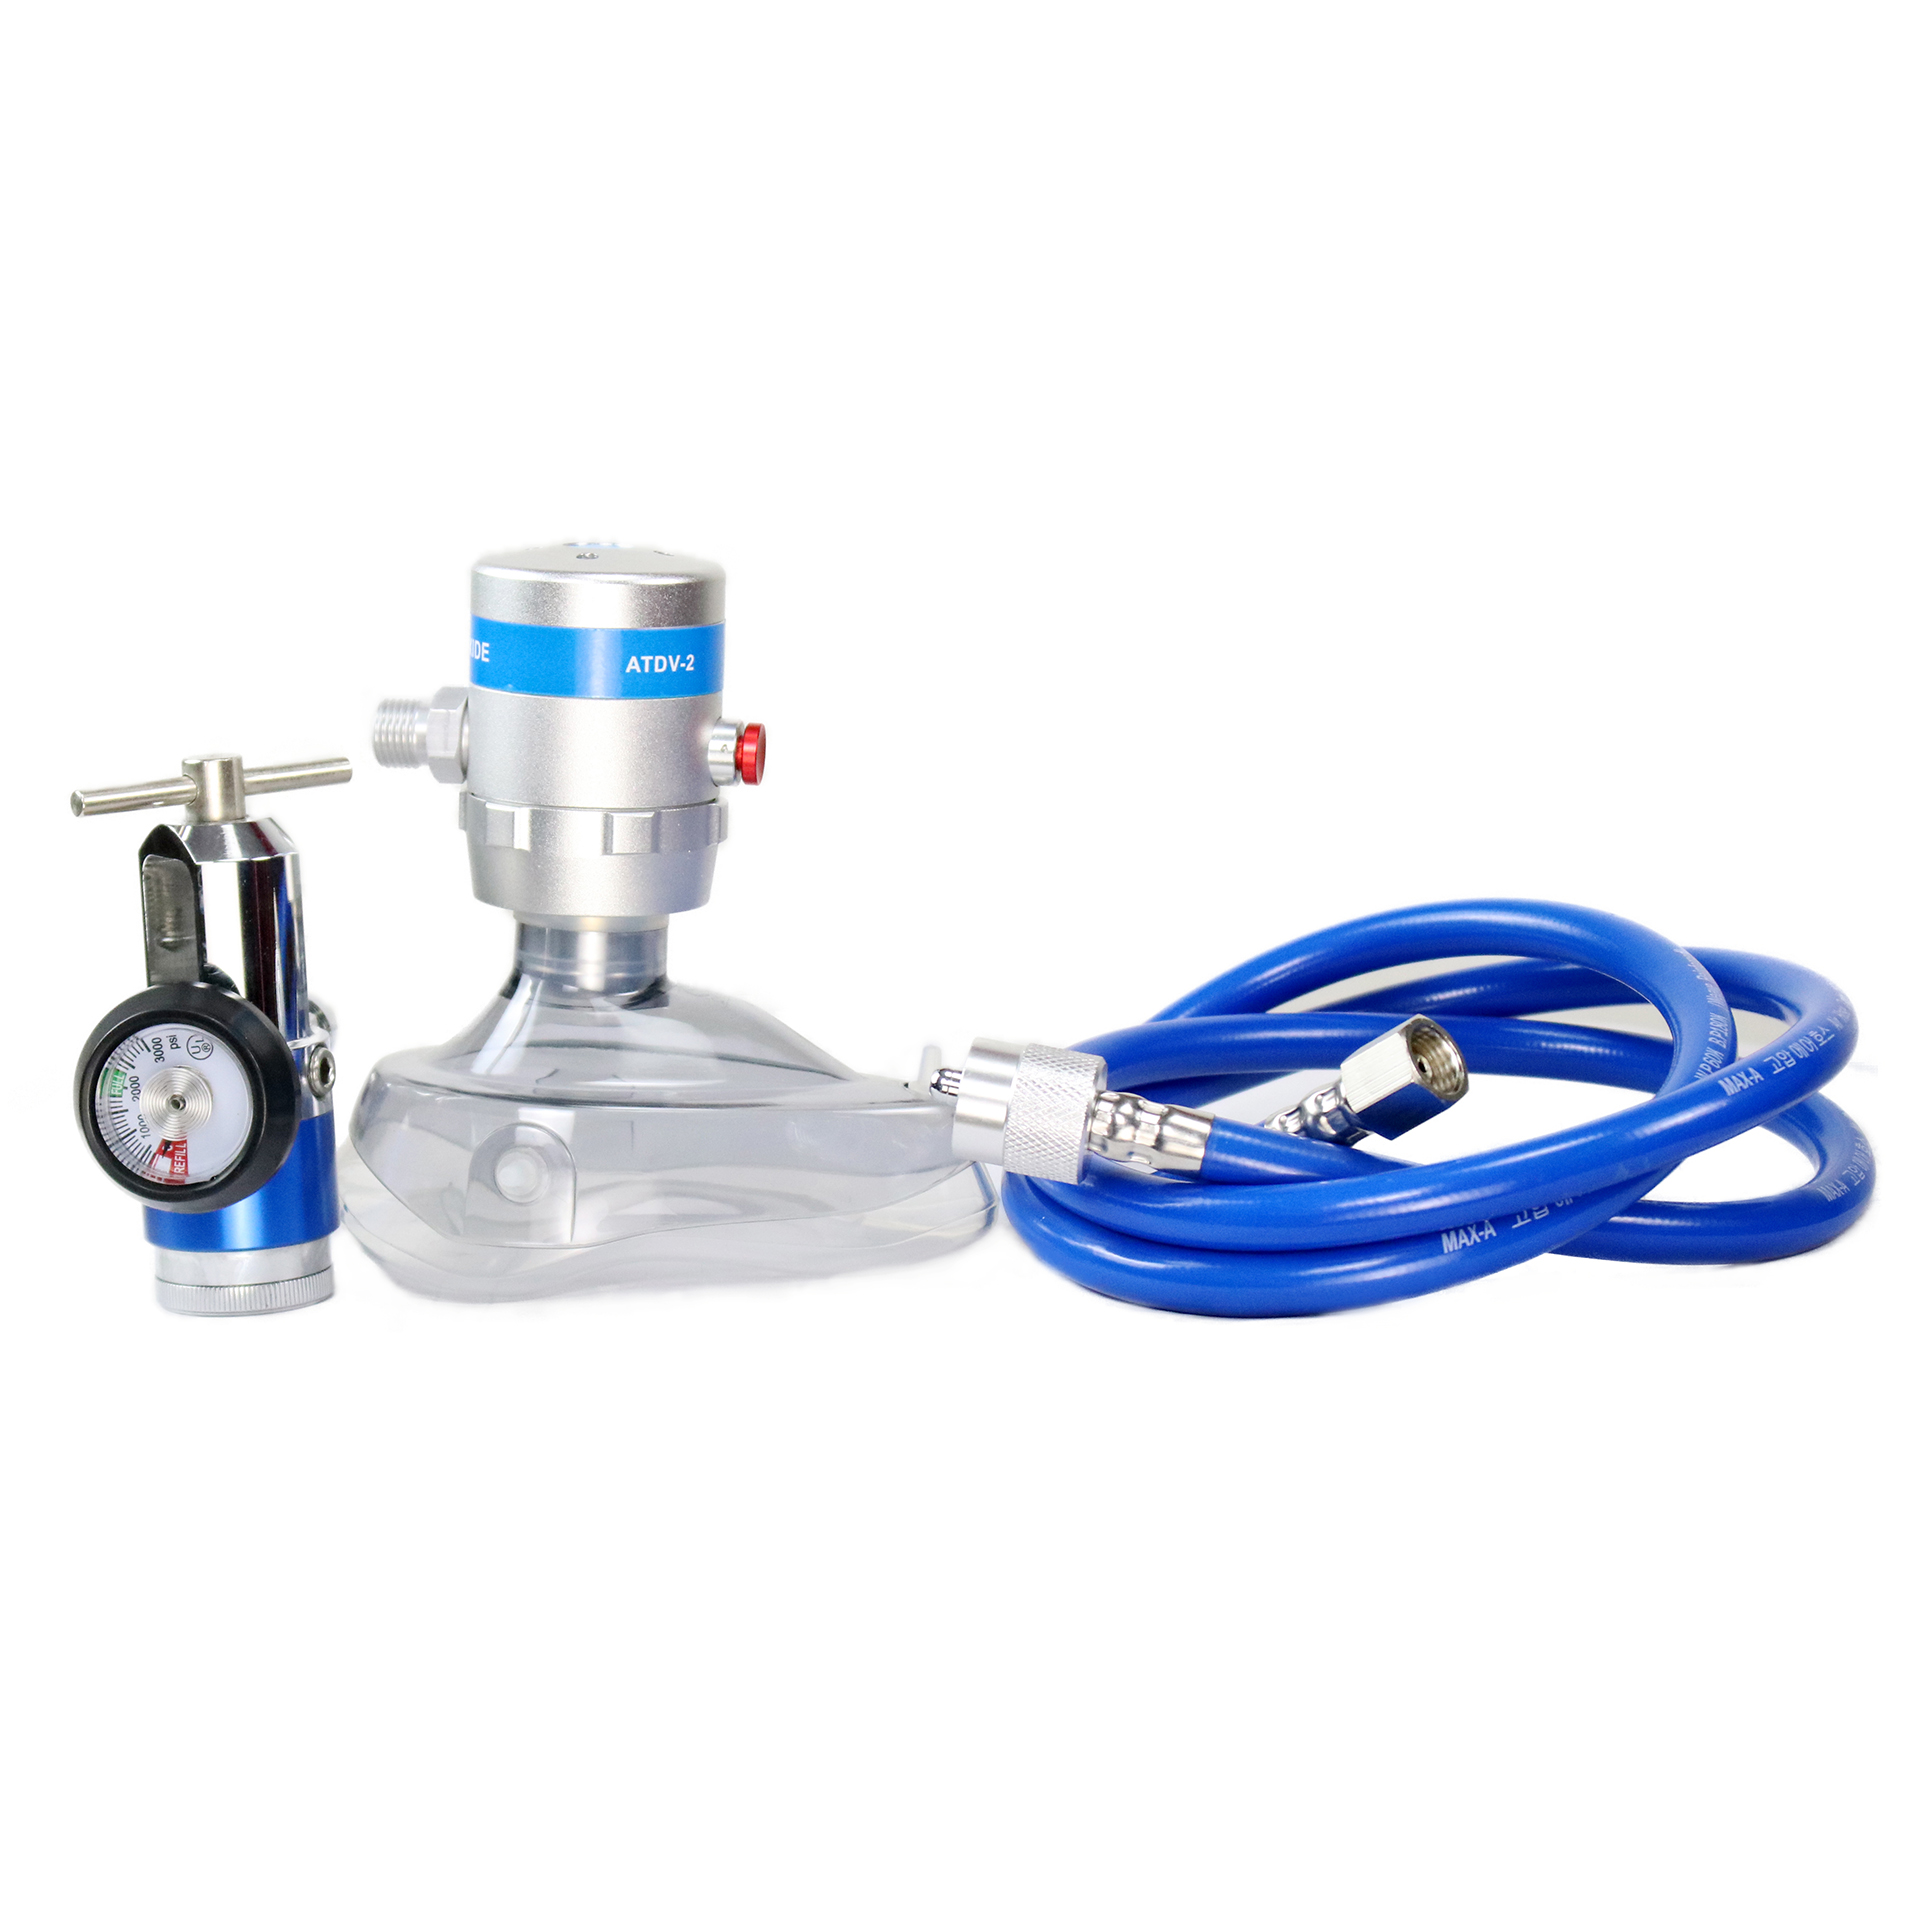 Nitrous Oxide demand valve set  delivery N2O gas to relax patient